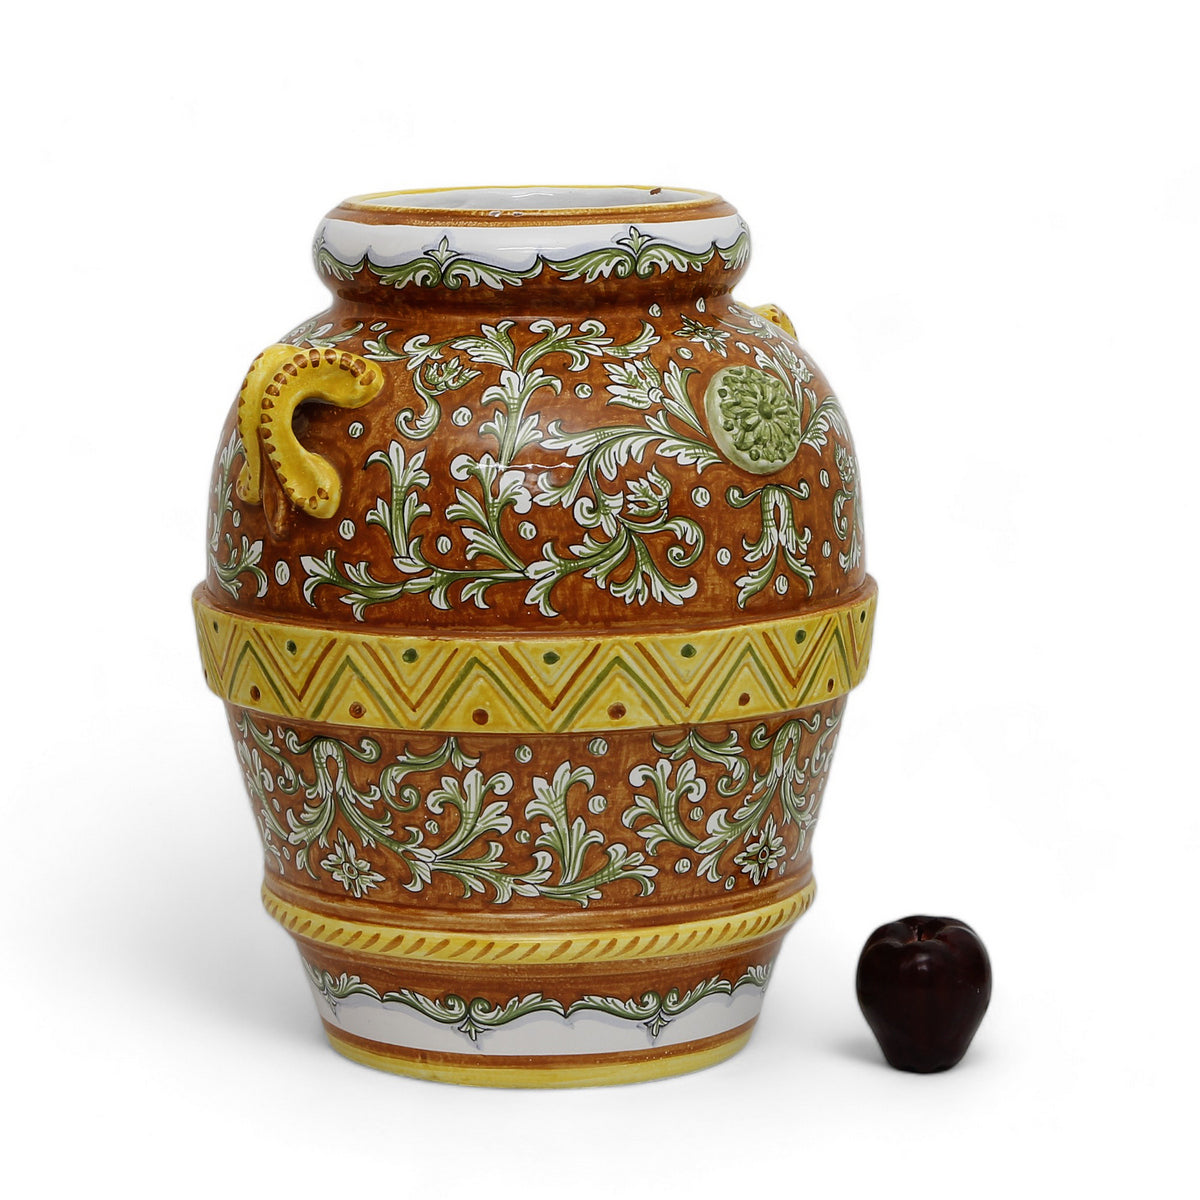 TUSCAN MAJOLICA: Orcio Urn Masterpiece featuring an intricate foliage over a brown background